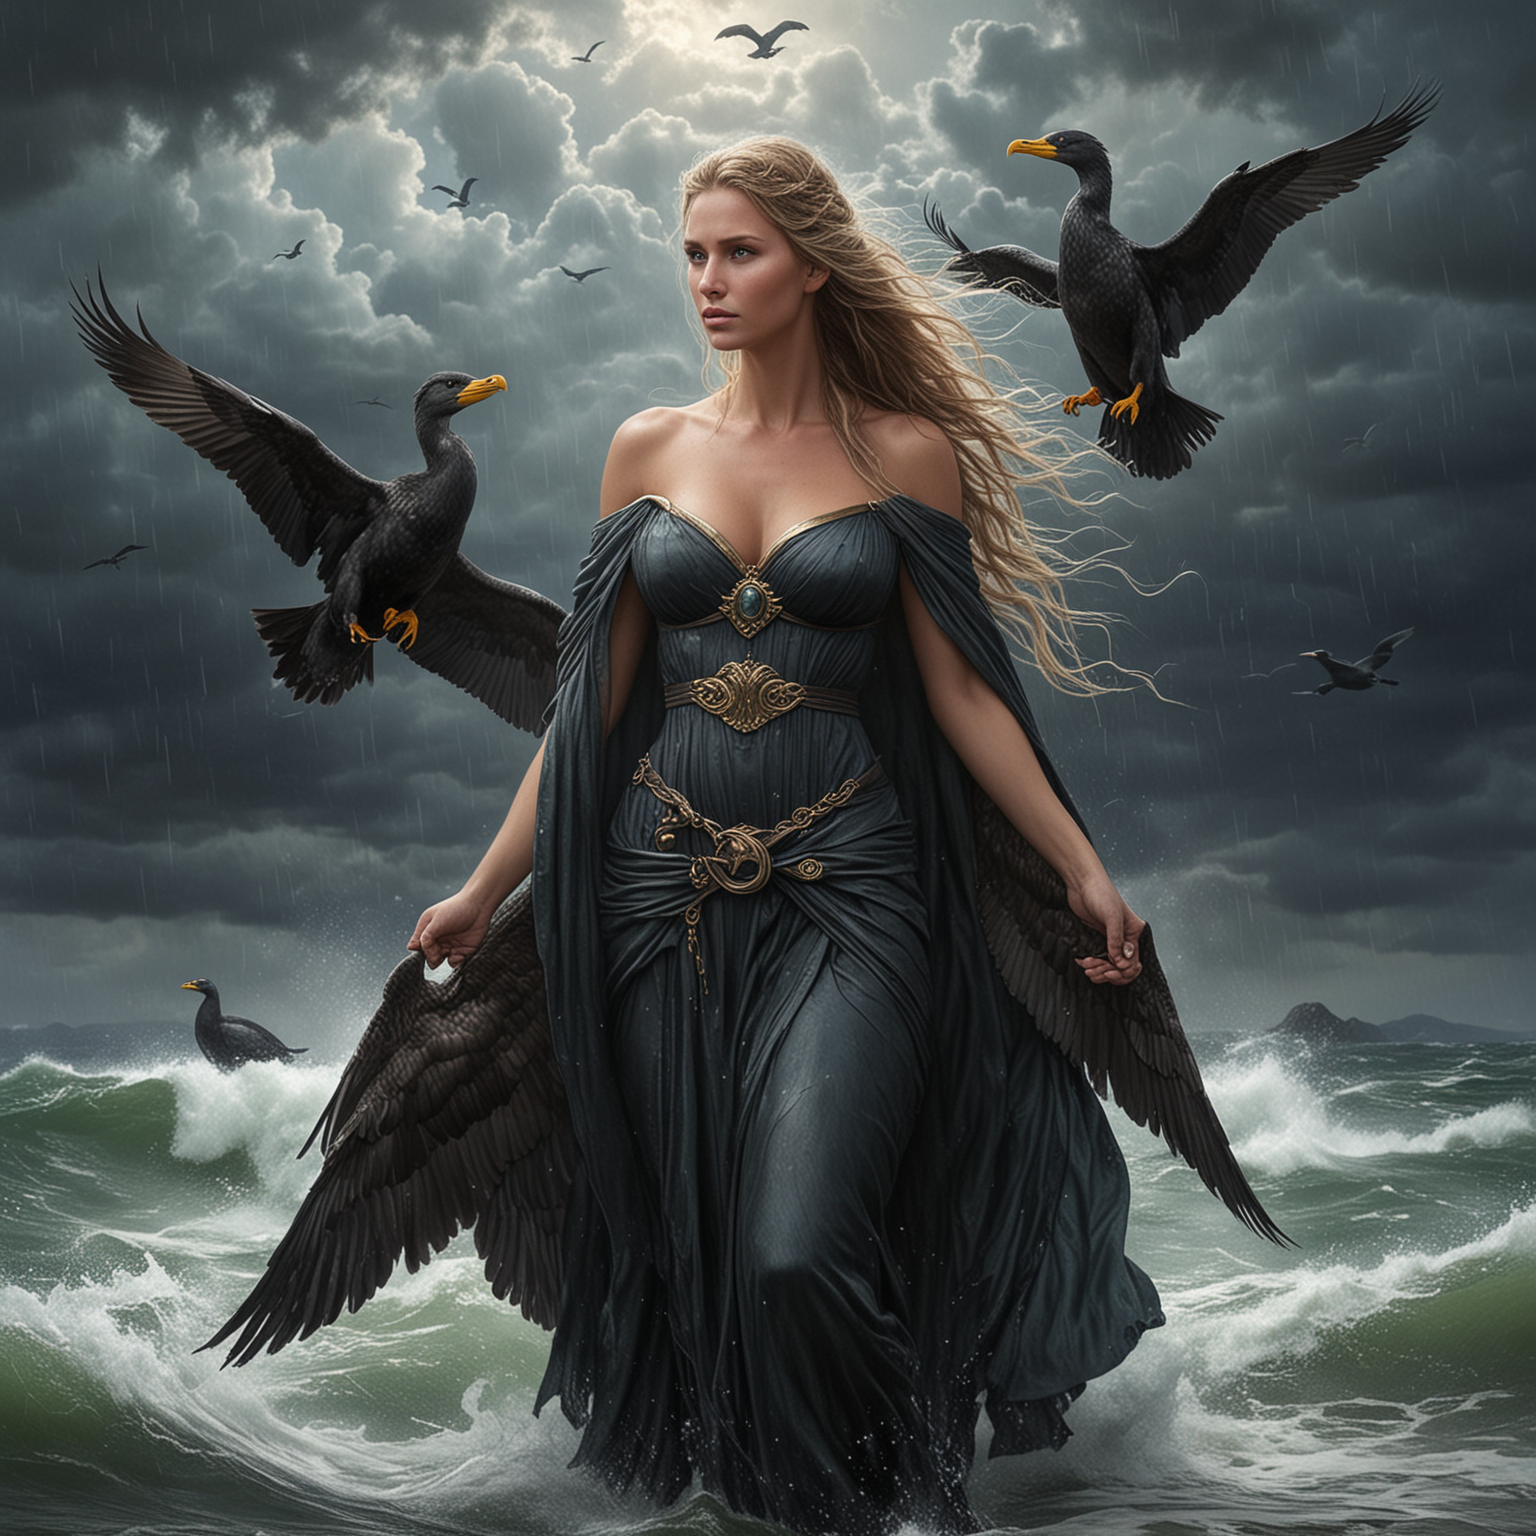 a goddess of storms and weather. She is a mother of three sons and is associated with cormorants. She appears mischievous